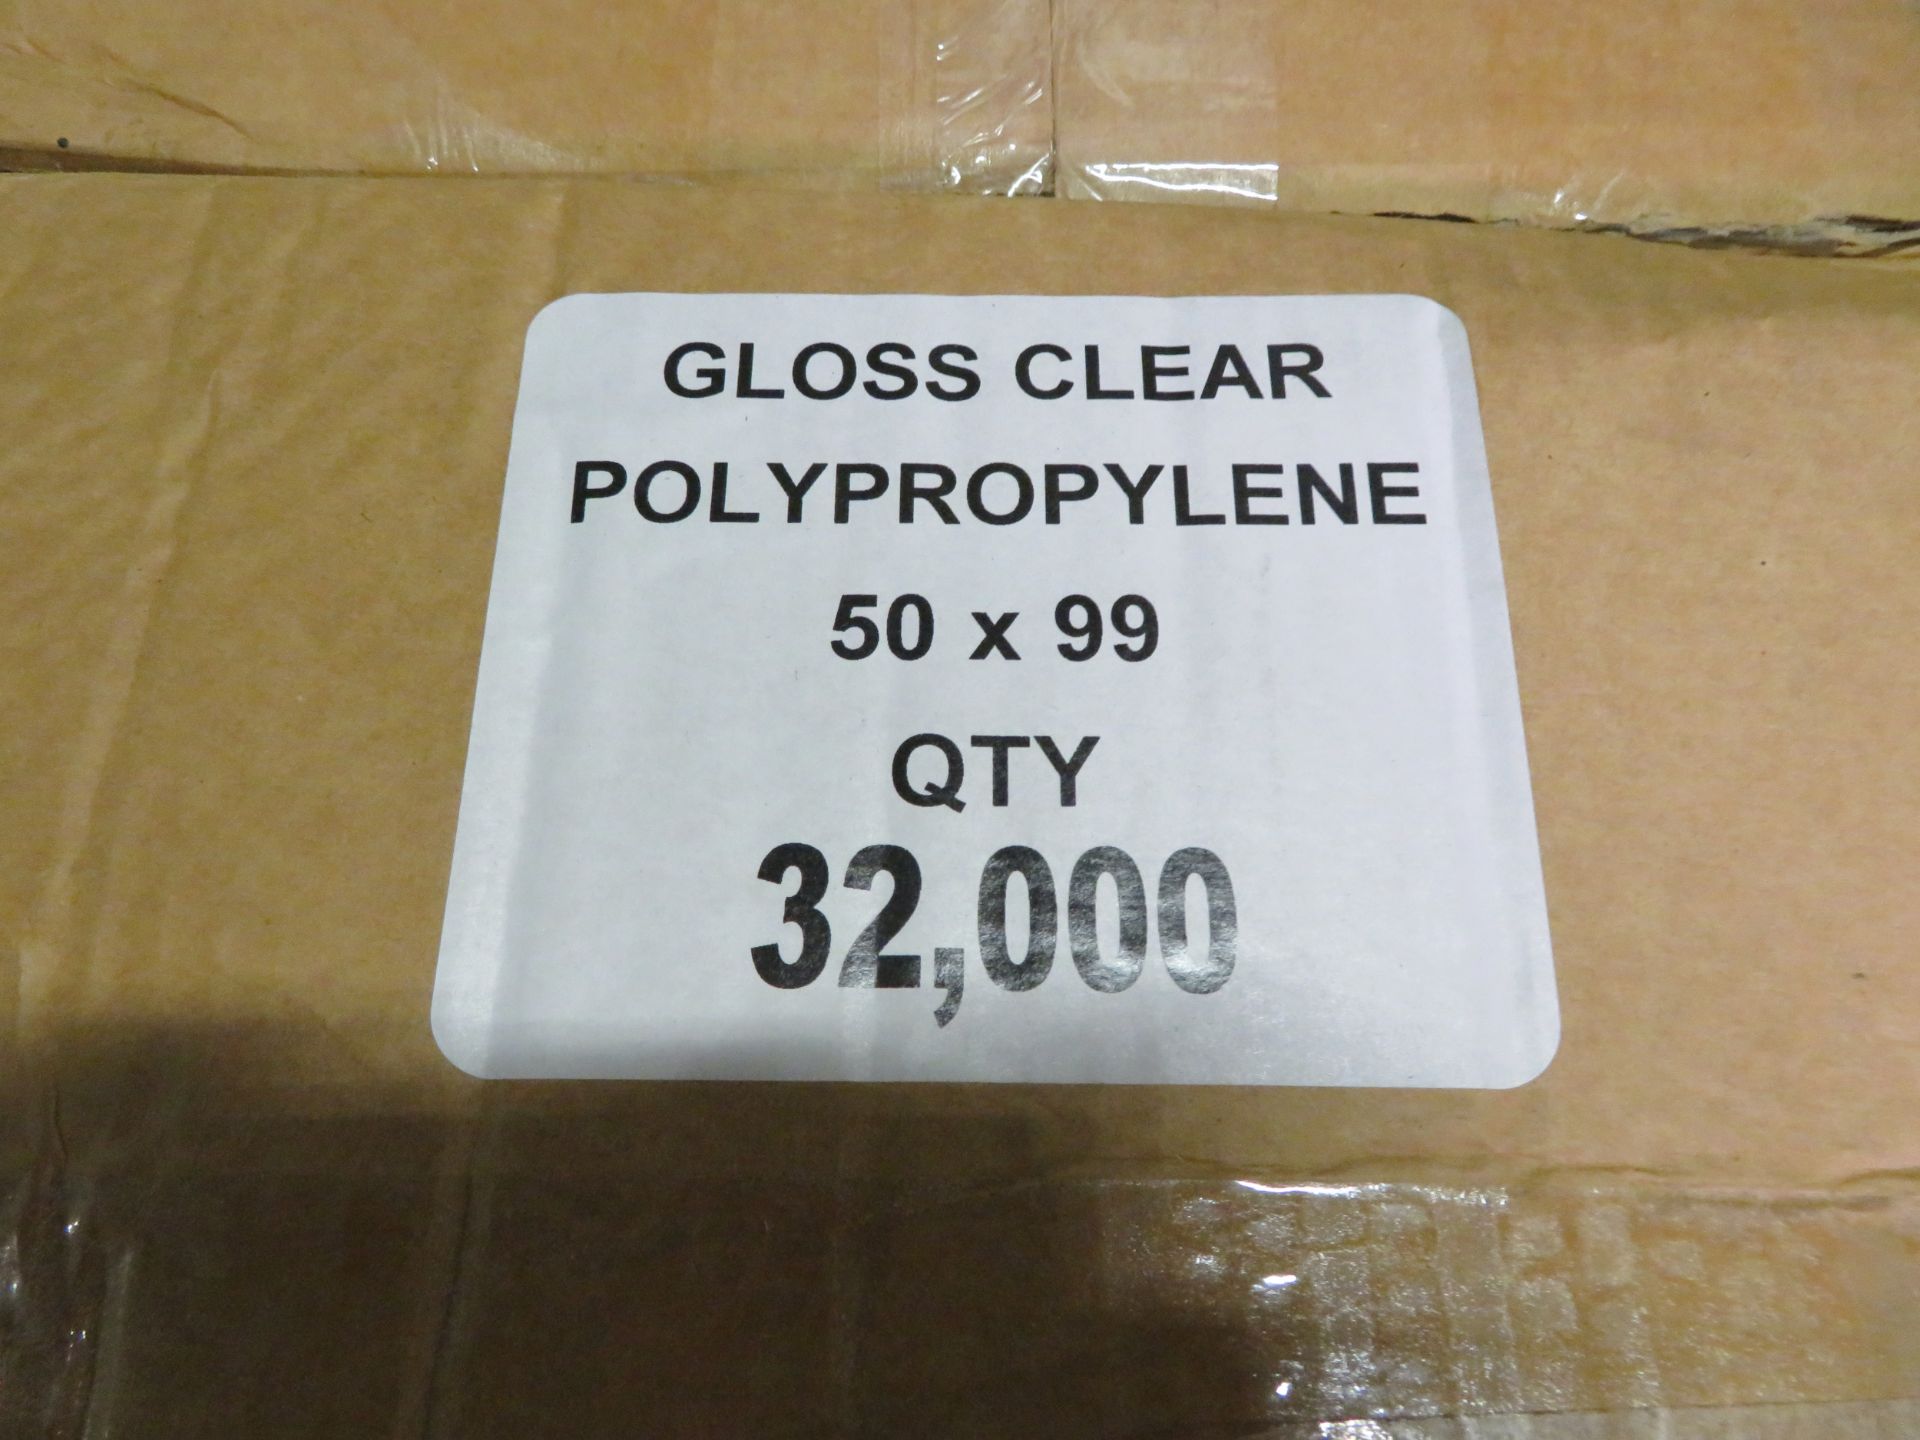 Gloss Clear polypropylene label rolls - 50x99 - 3 boxes - 32 rolls per box - 1000 labels p - Image 3 of 3